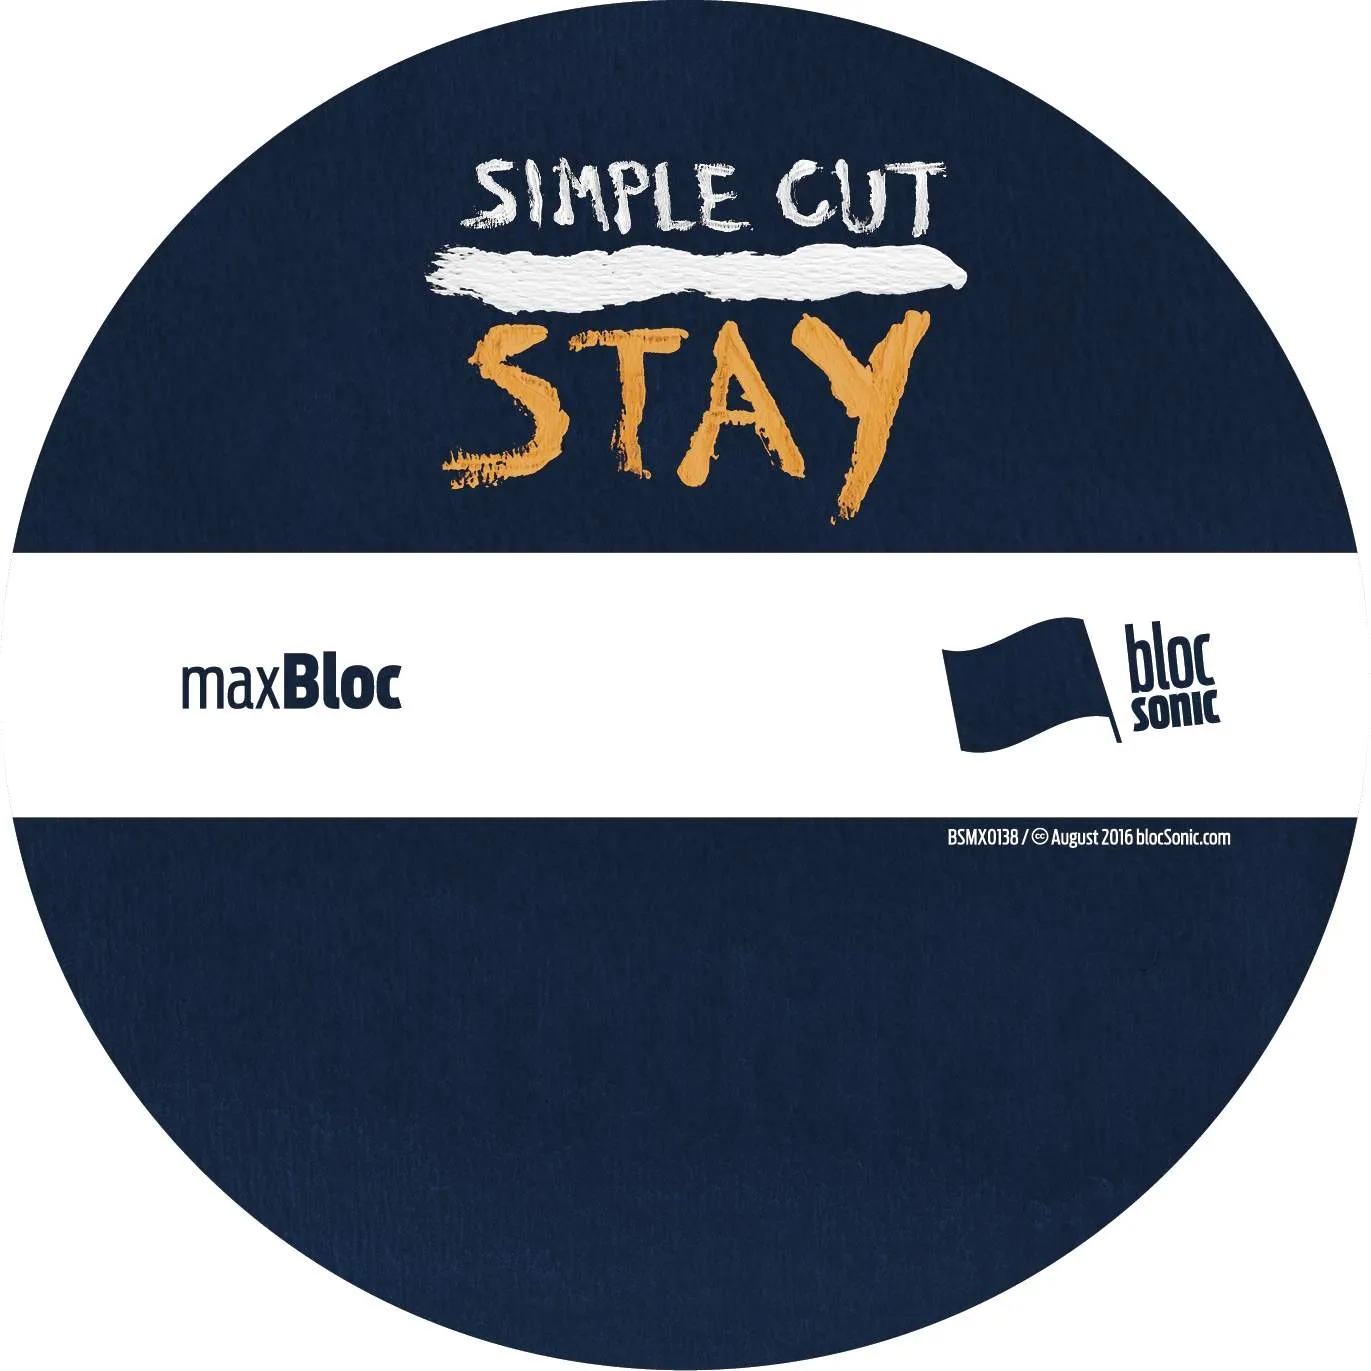 Album disc for “Stay” by Simple CUT